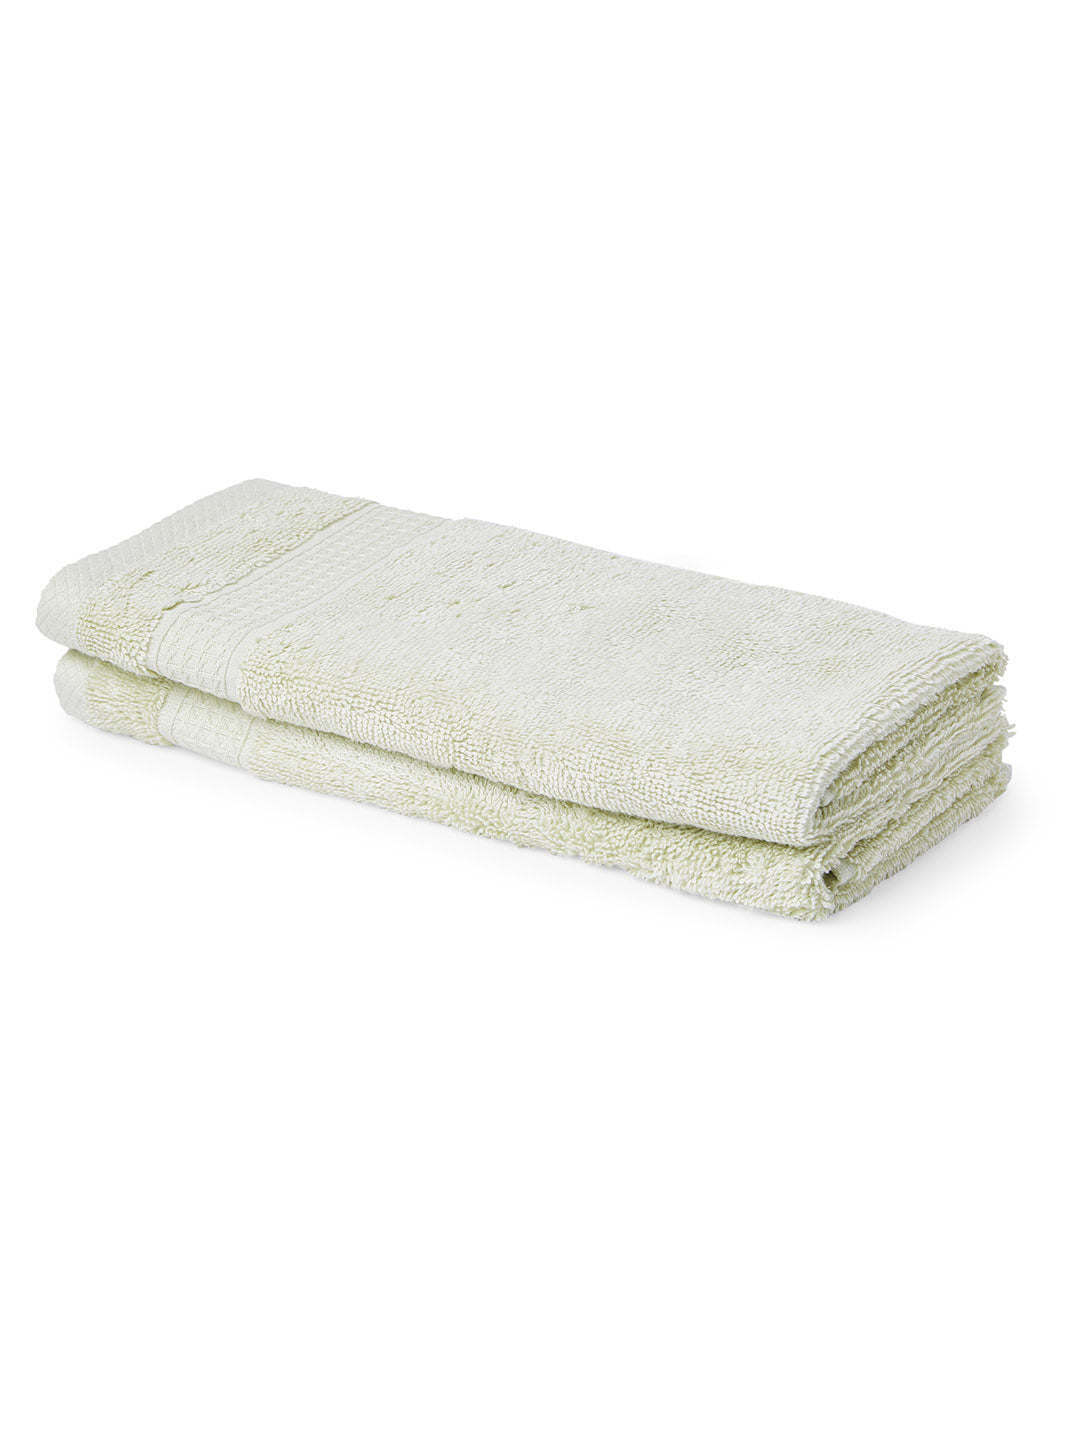 Spaces Organic 2 Pieces Hand Towels (Green)